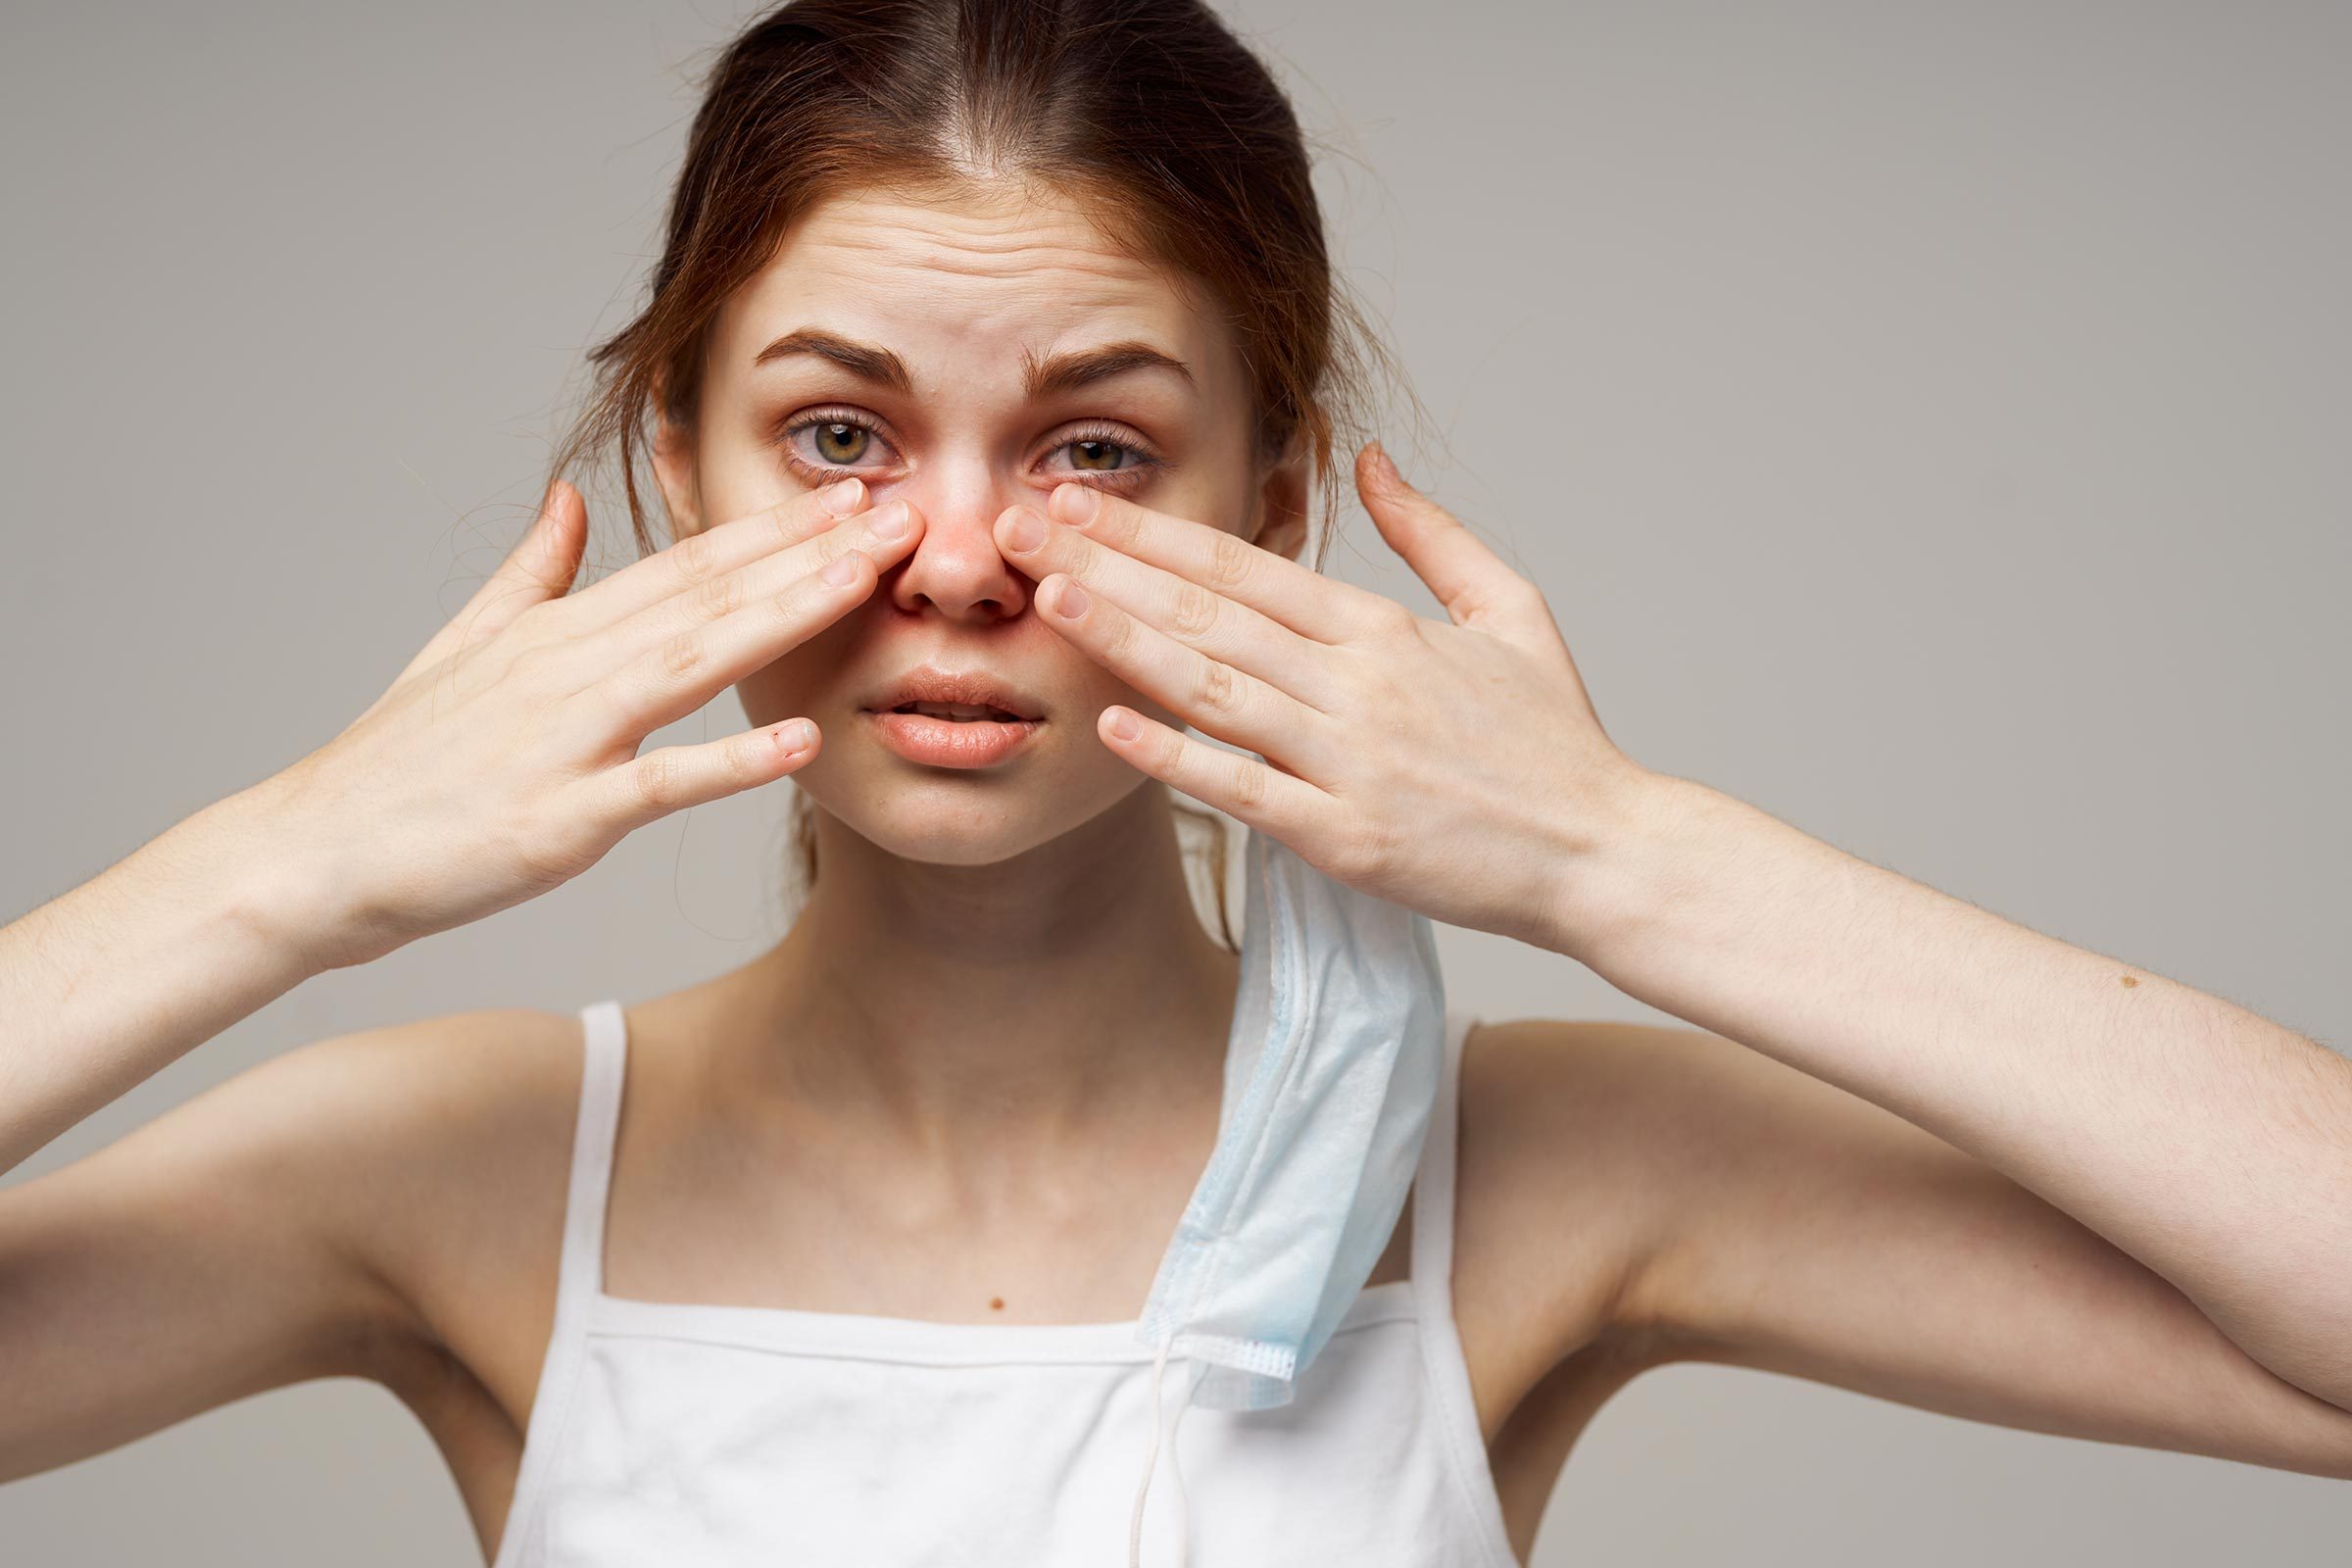 8 Things Your Eye Boogers Can Reveal About Your Health